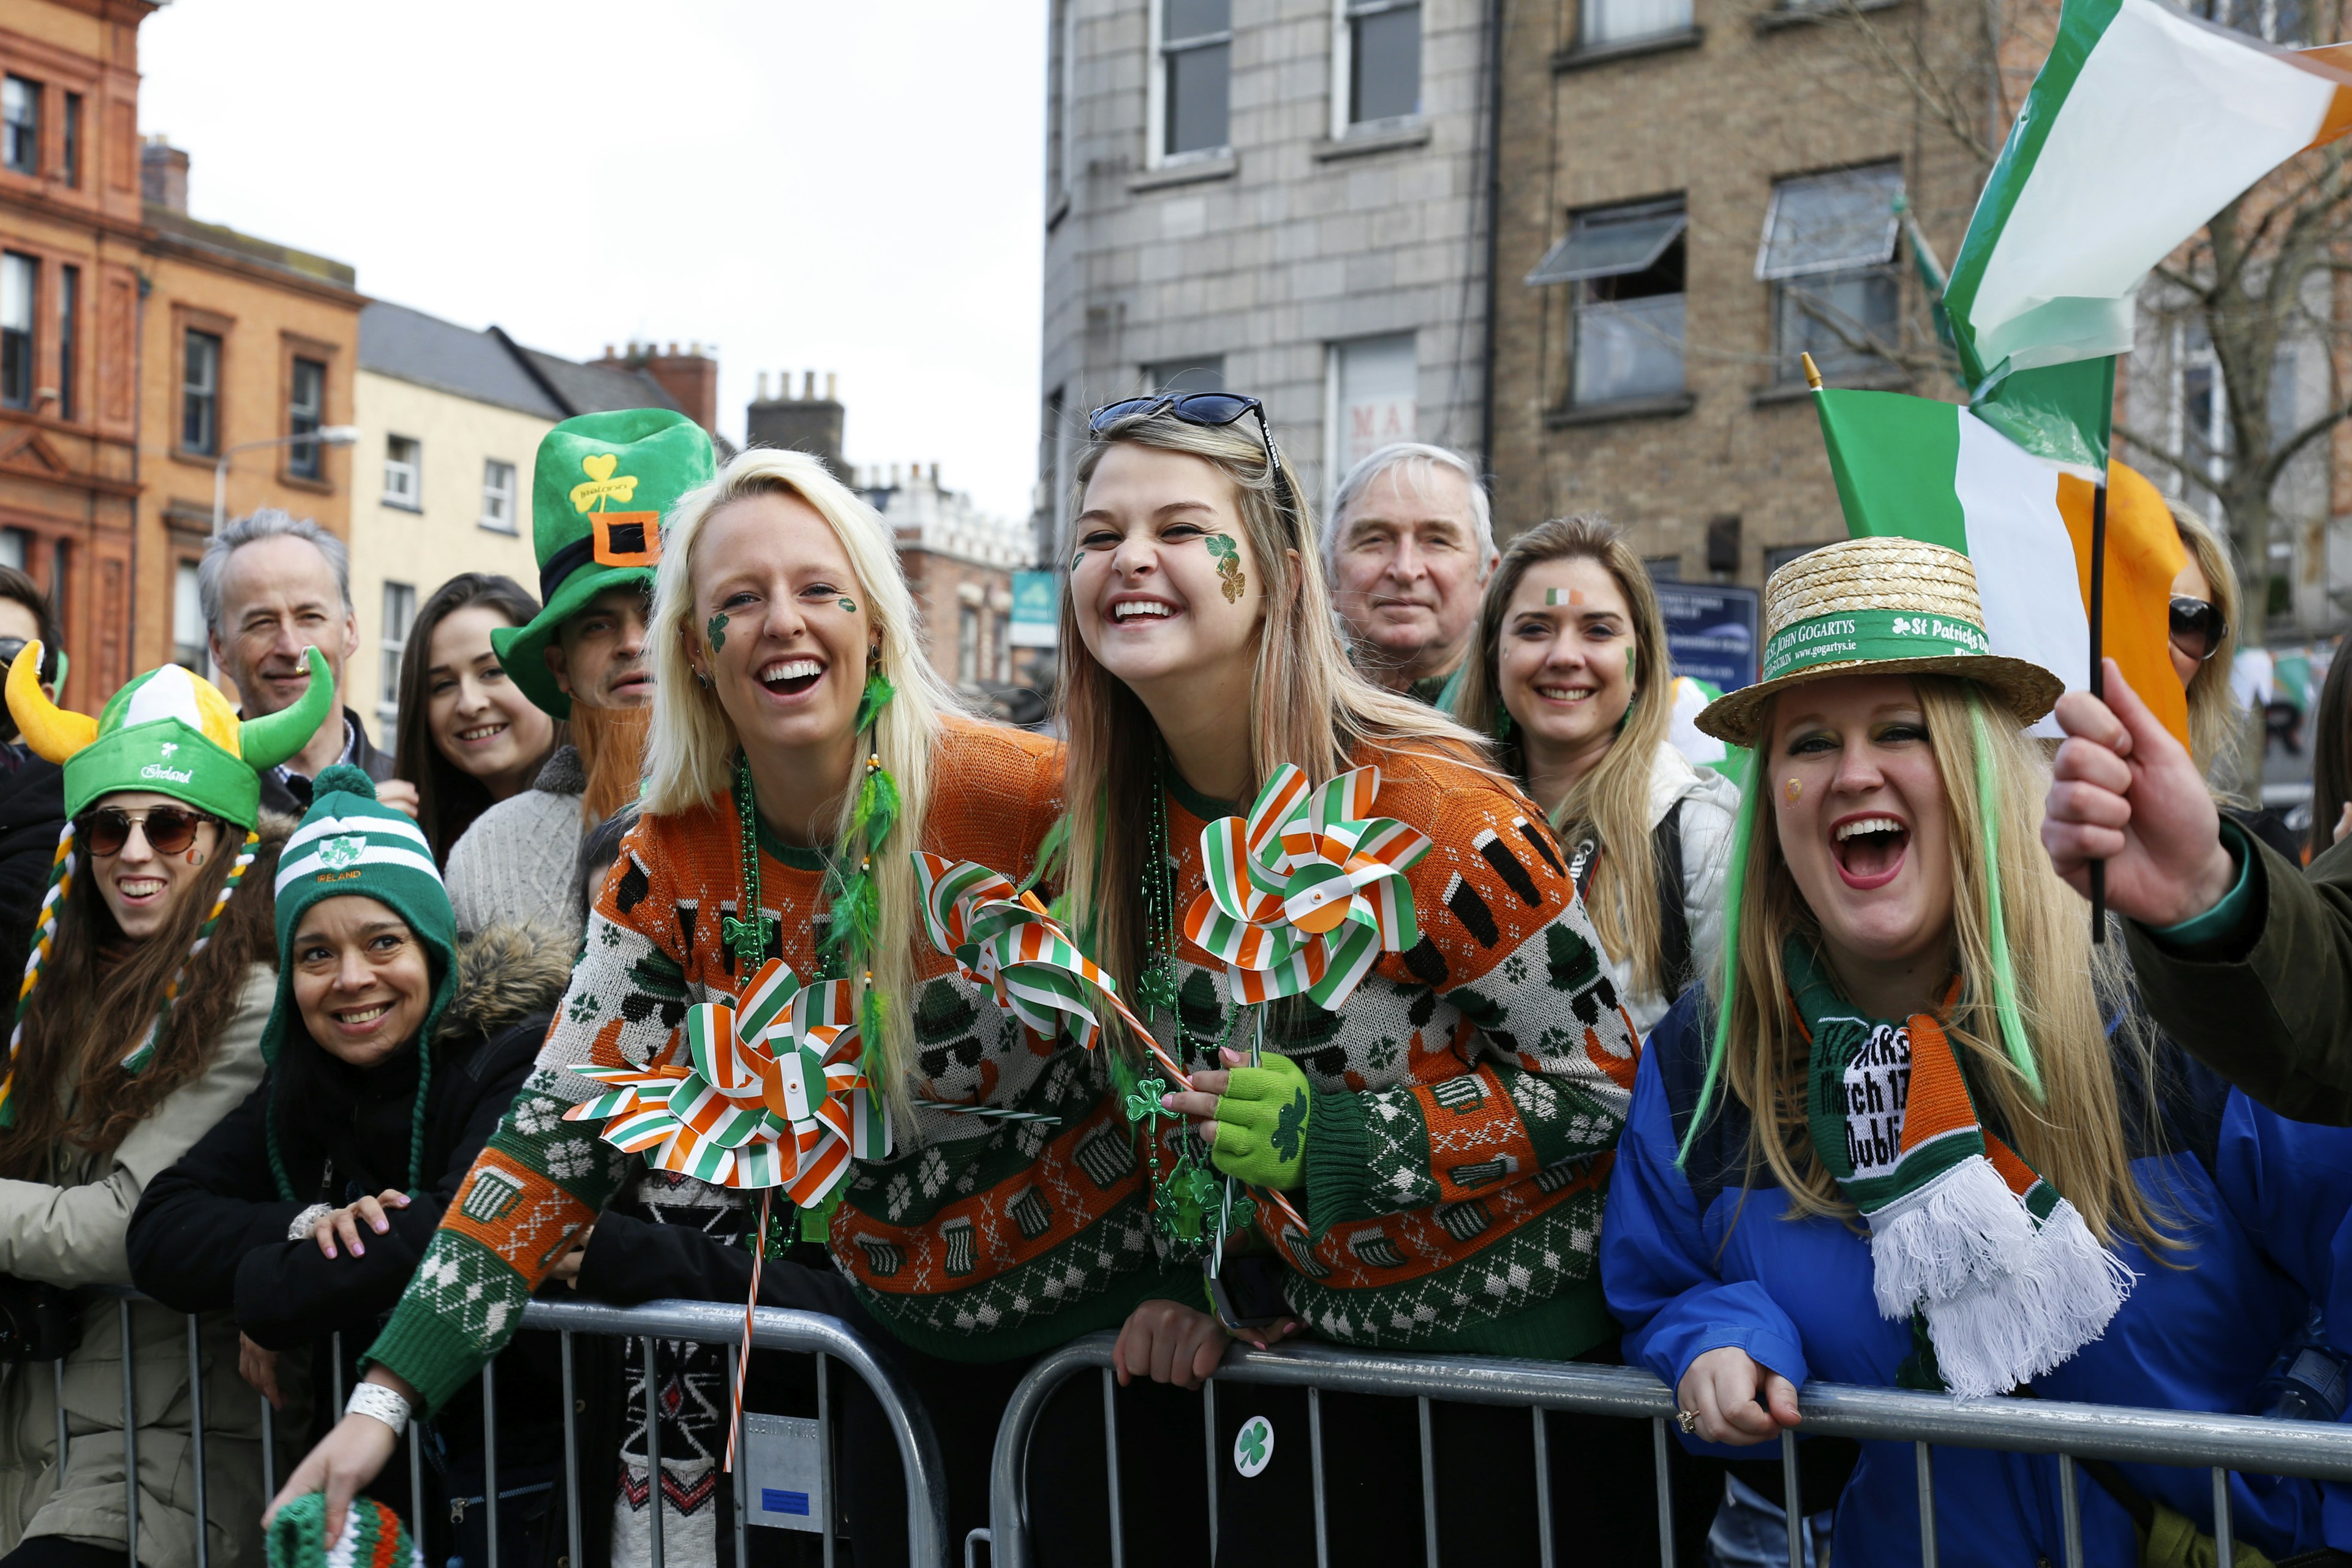 Festival goers at the St Patrick's Day Parade.